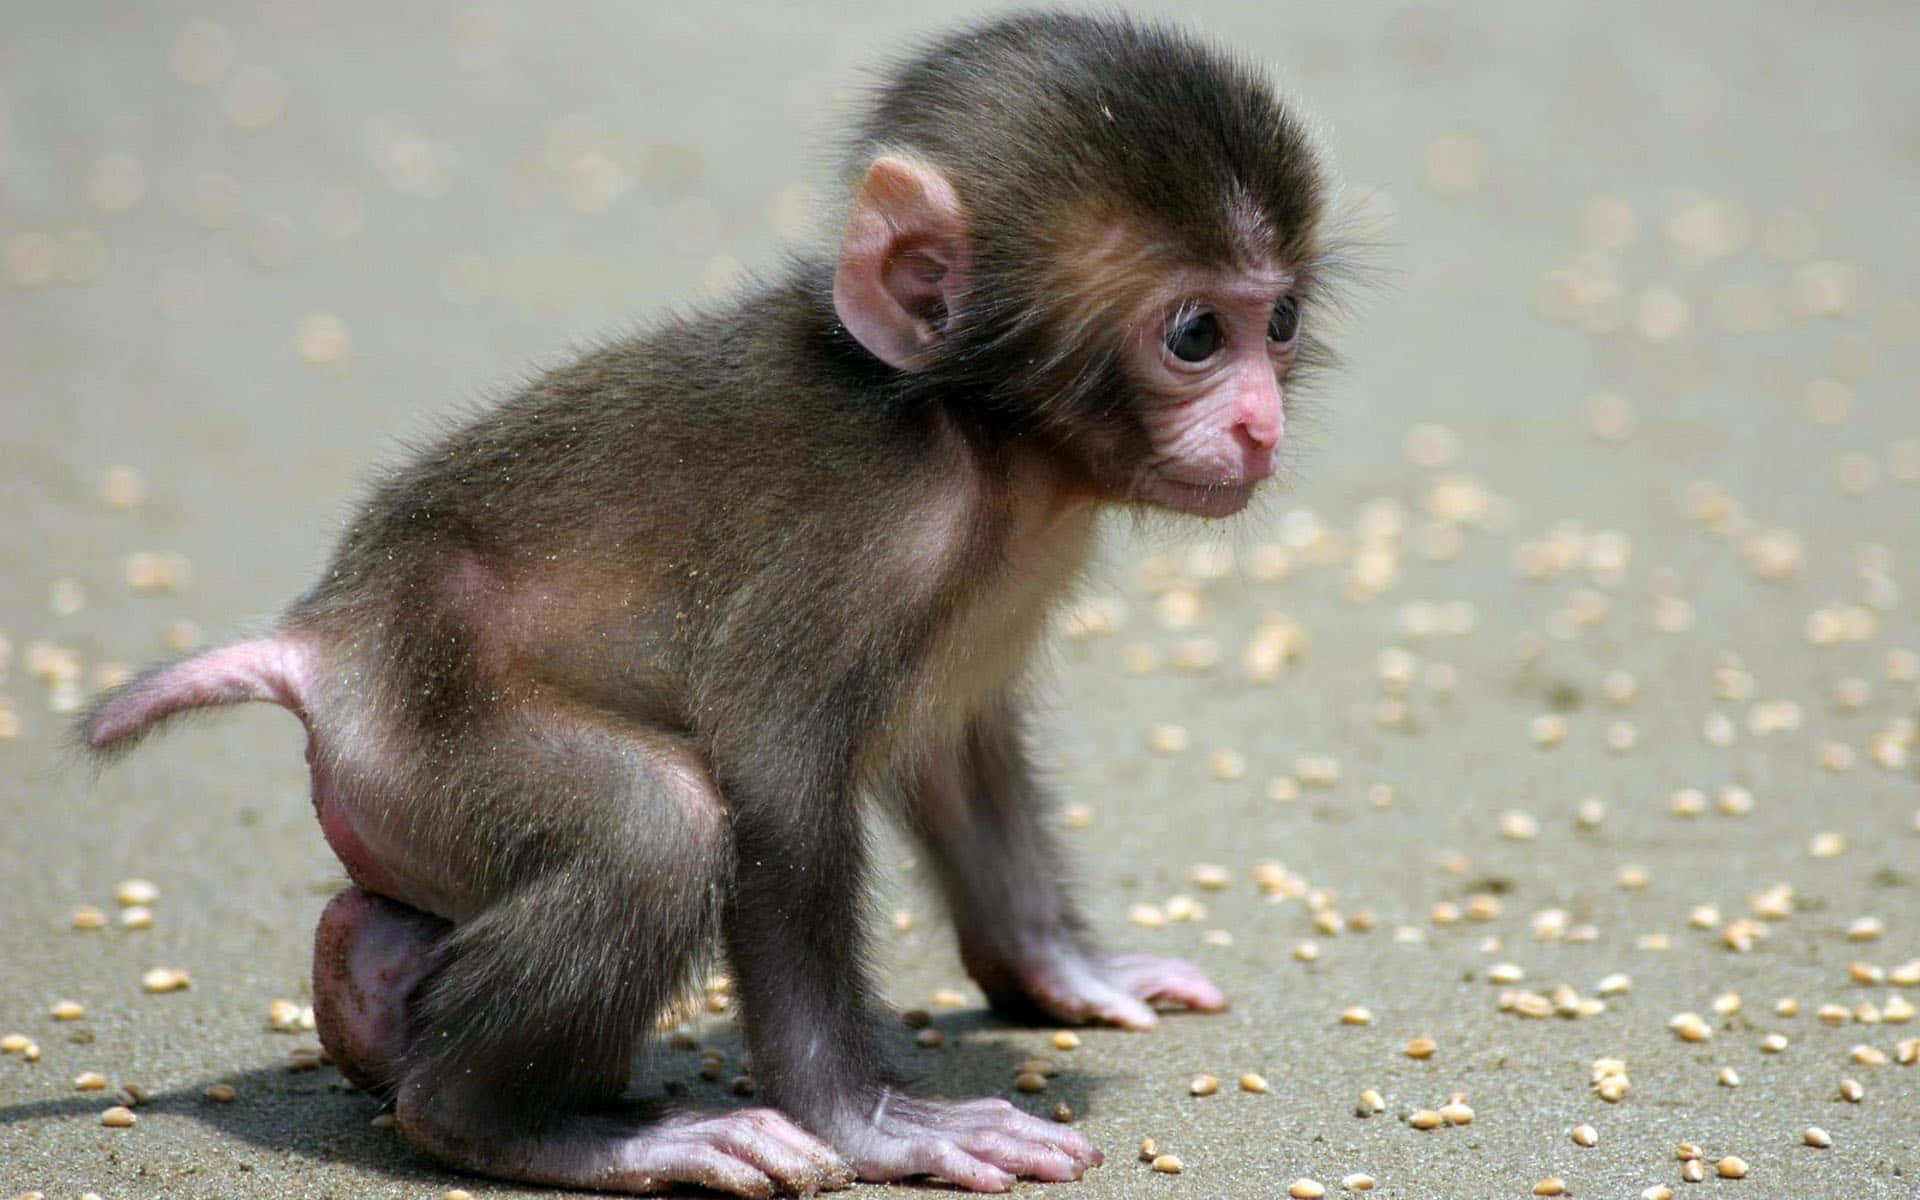 Cute Monkey Photo On The Ground Wallpaper